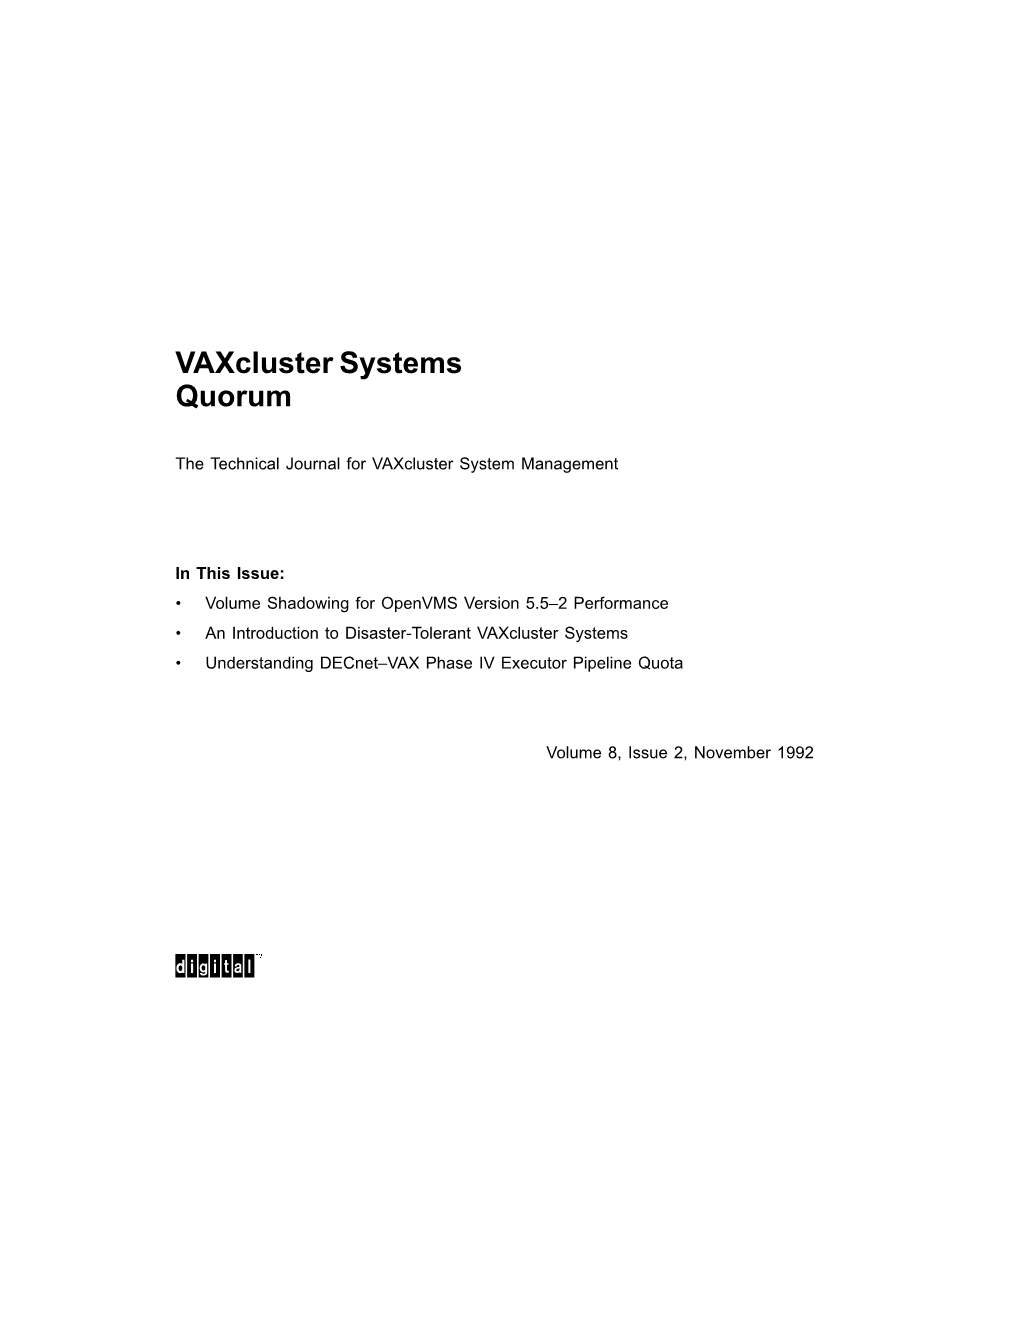 Vaxcluster Systems Quorum